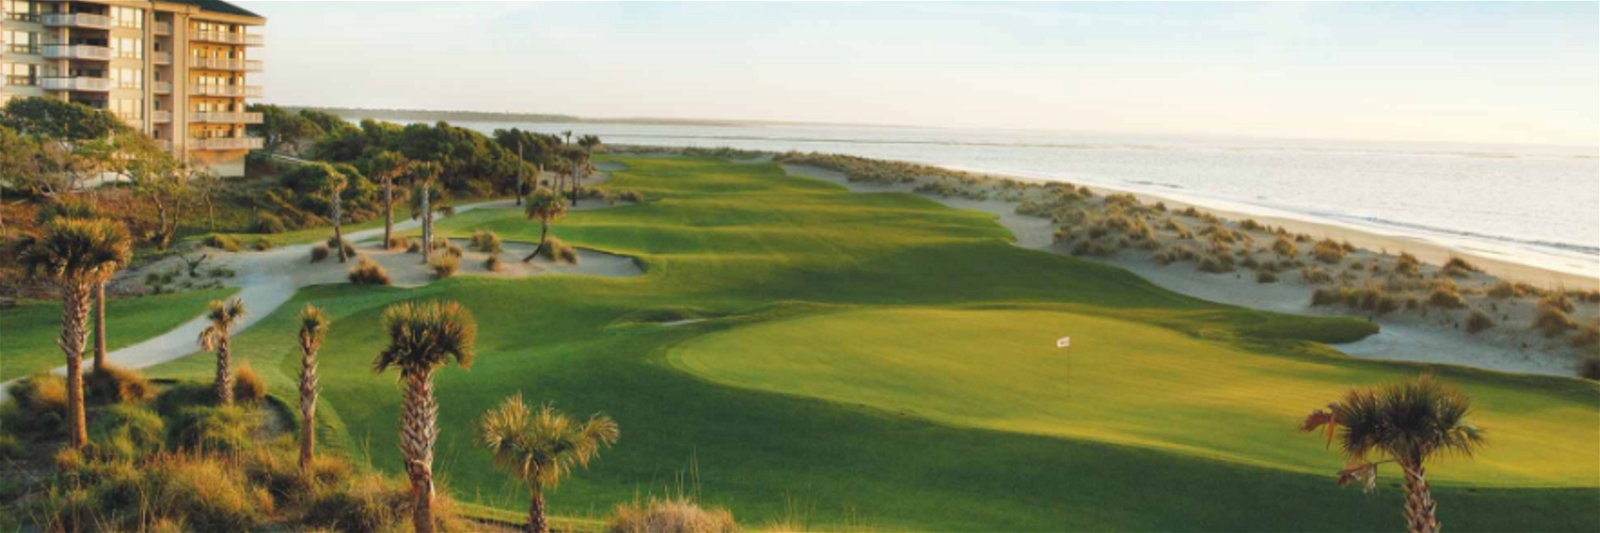 Golf Vacation Package - Wild Dunes Resort Stay and Play! Bonus $100 Callaway Gift Card!